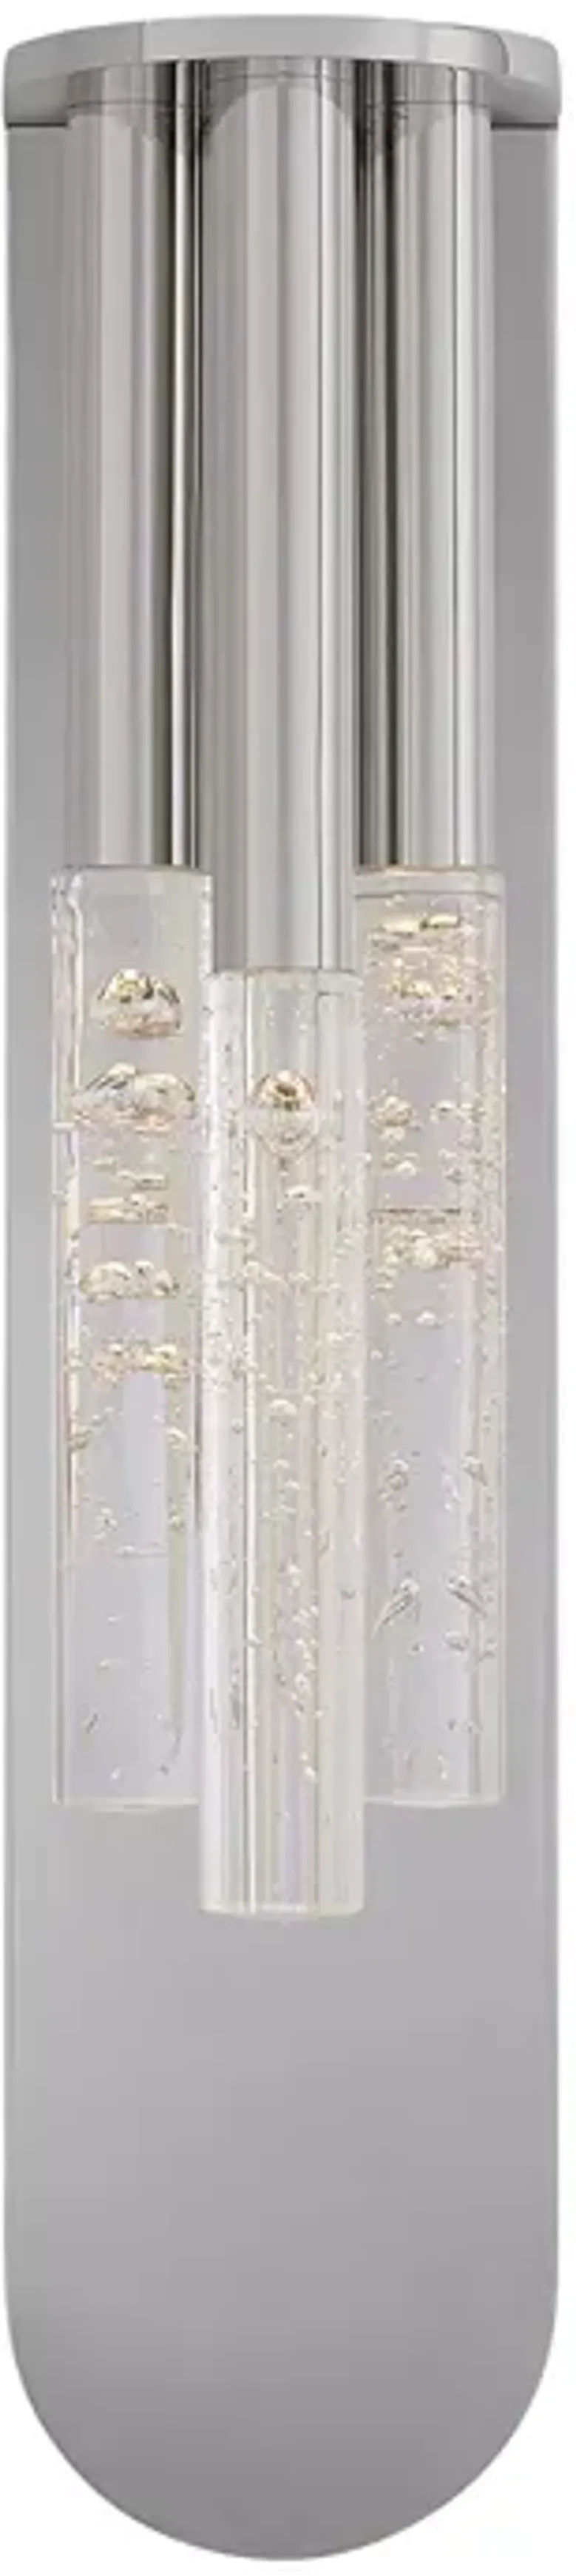 Kelly Wearstler Rousseau Medium Multi-Drop Sconce with Seeded Glass Shade